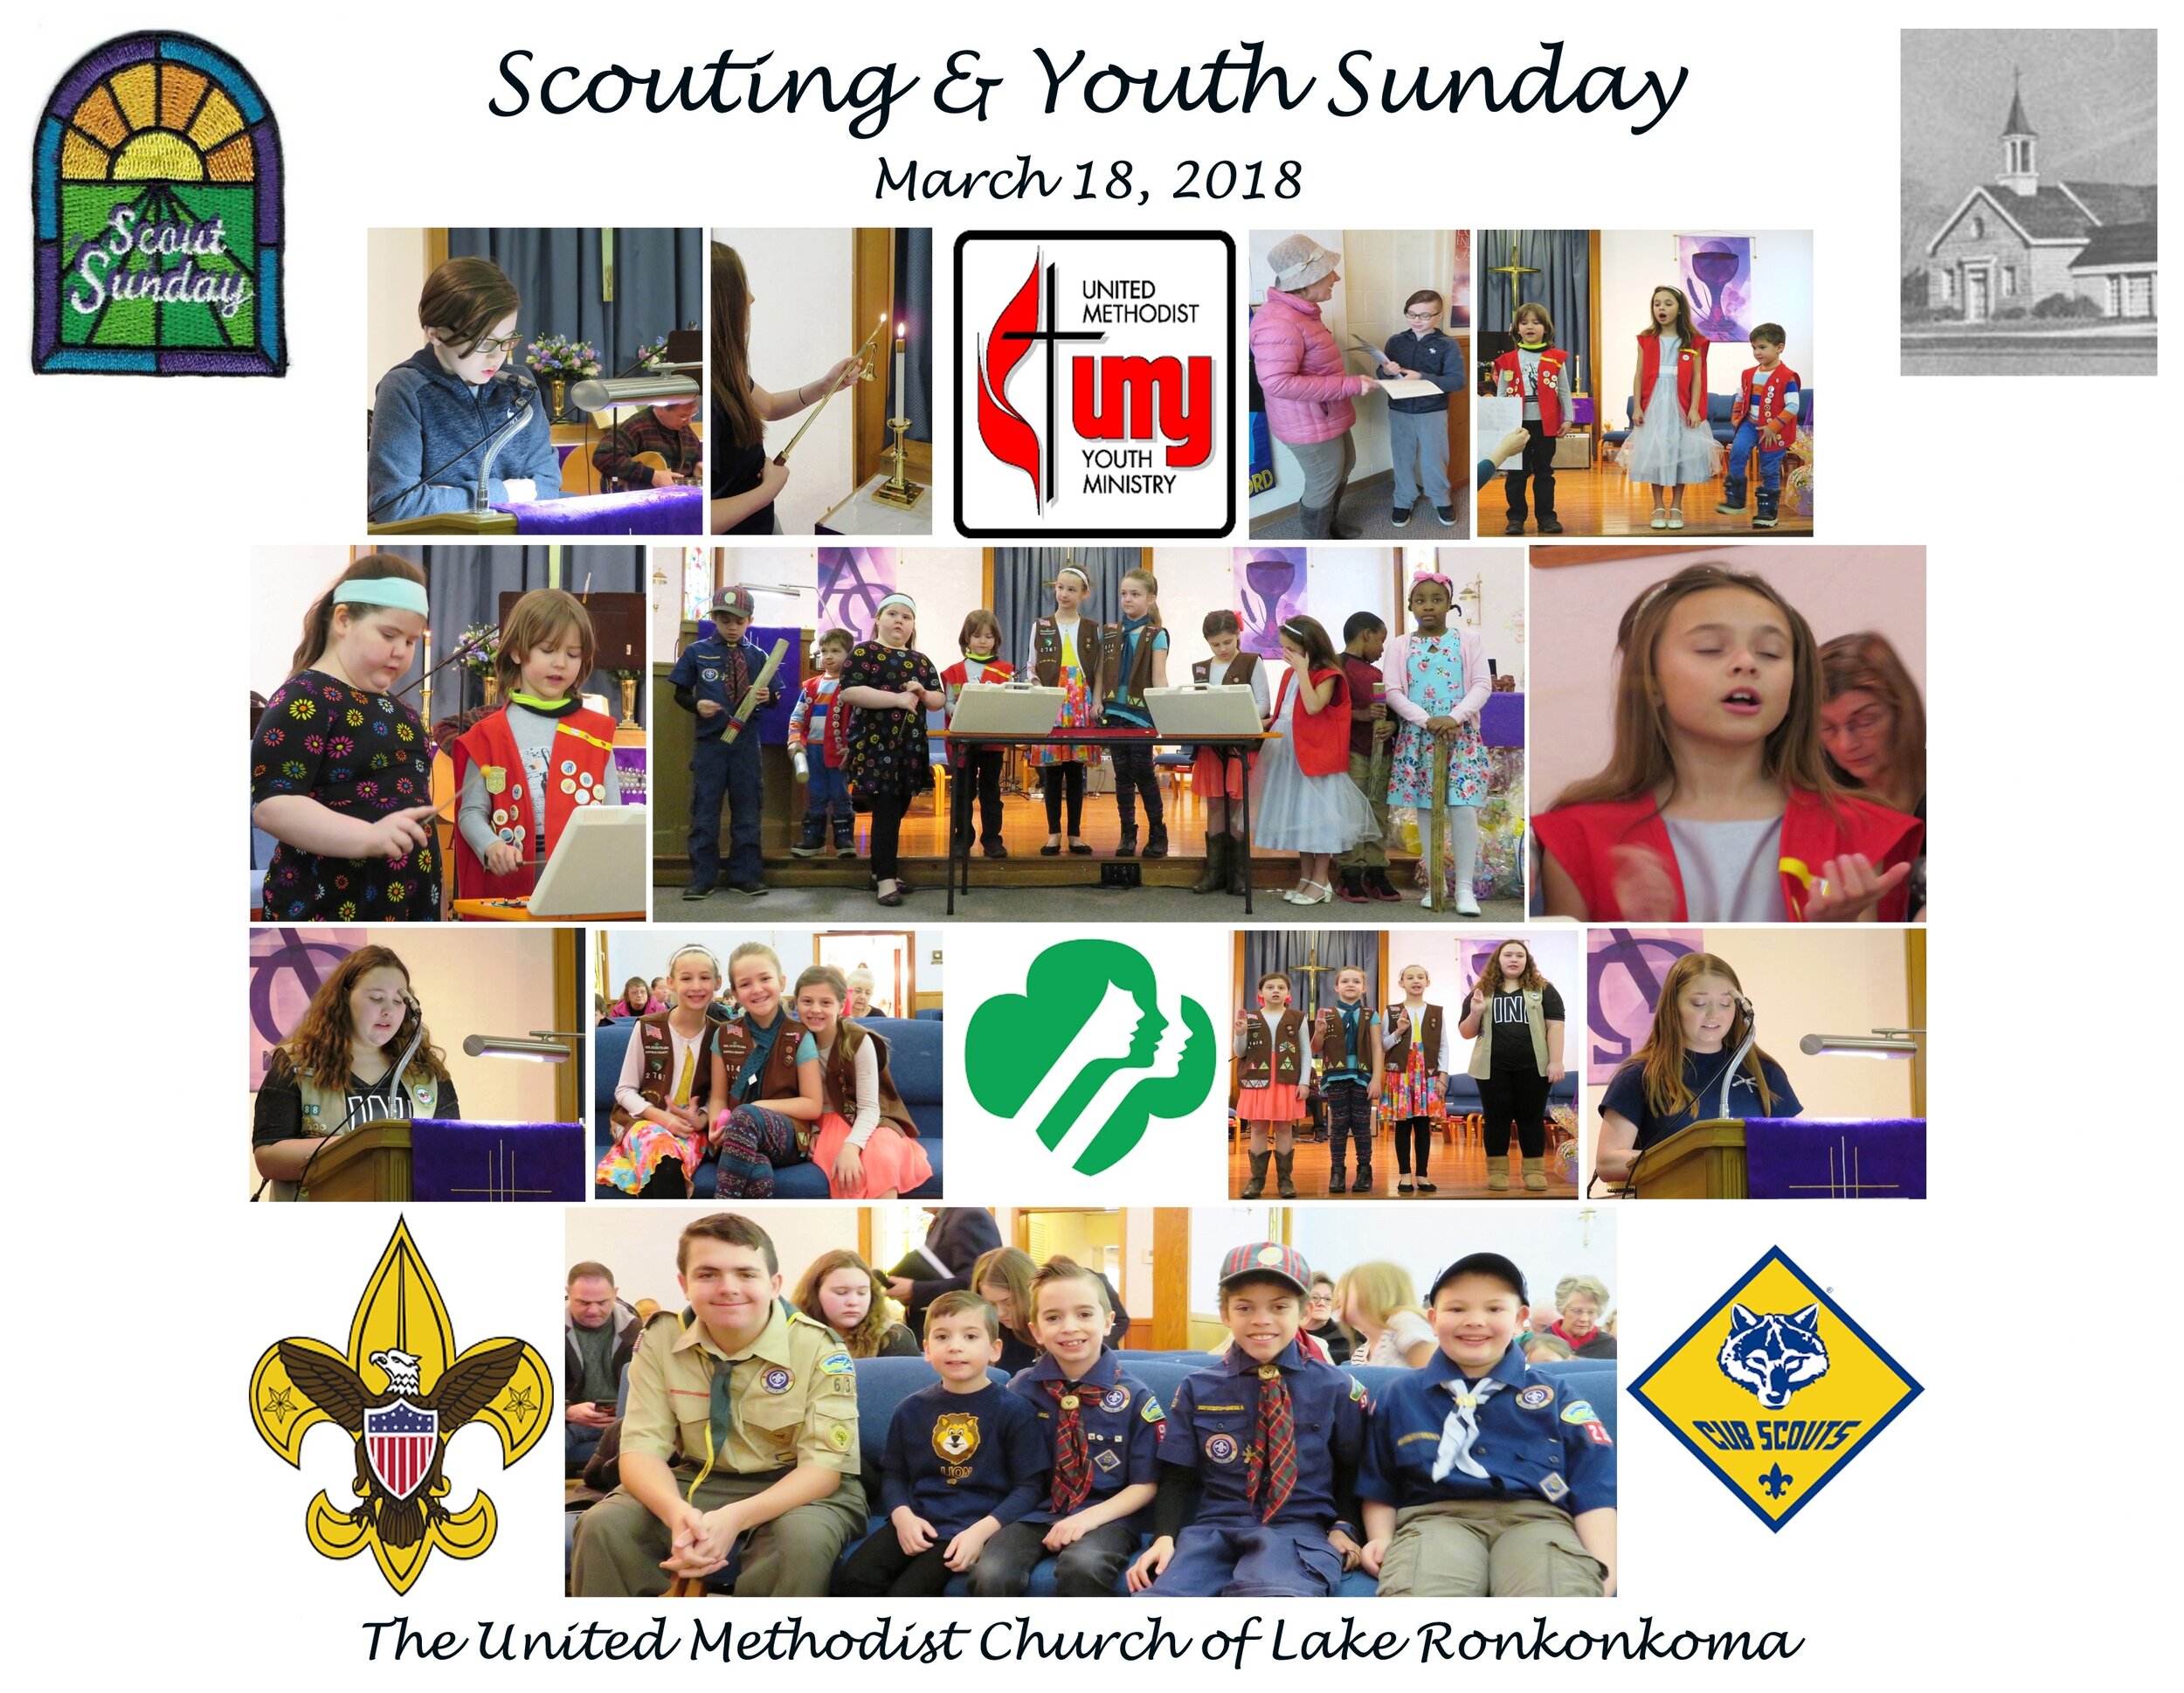 06-2018-03-18 Scouting & Youth Sunday.jpg